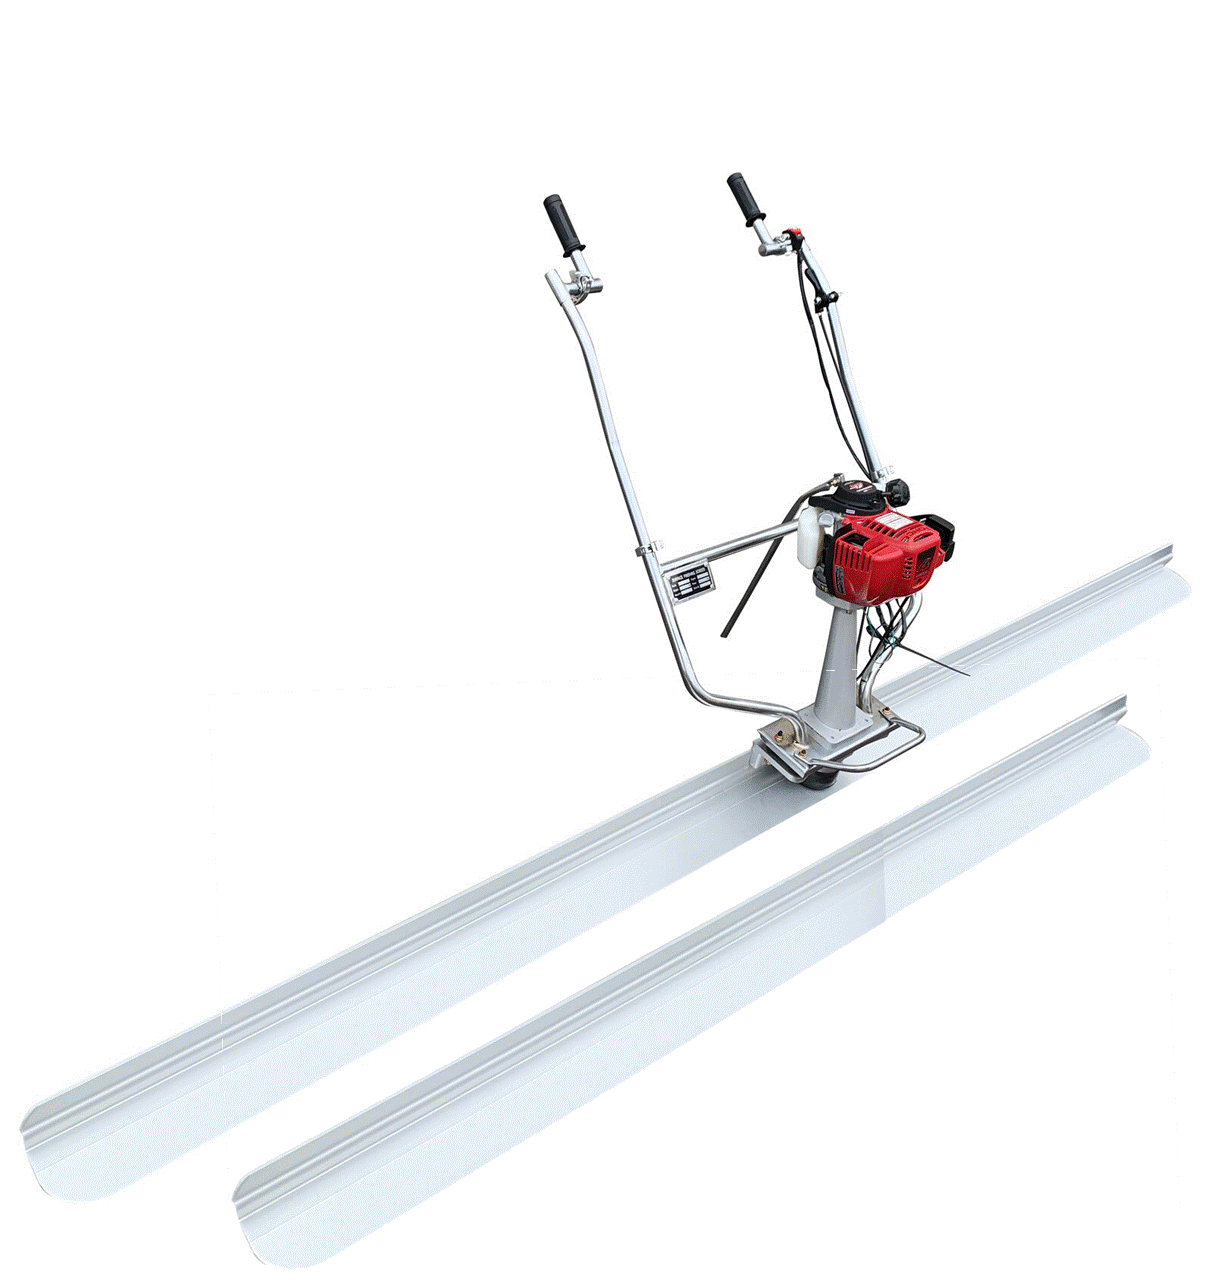 Honda GX35 Vibrating Gas Concrete Power Screed Finishing Float Tool with 10' Blade Board